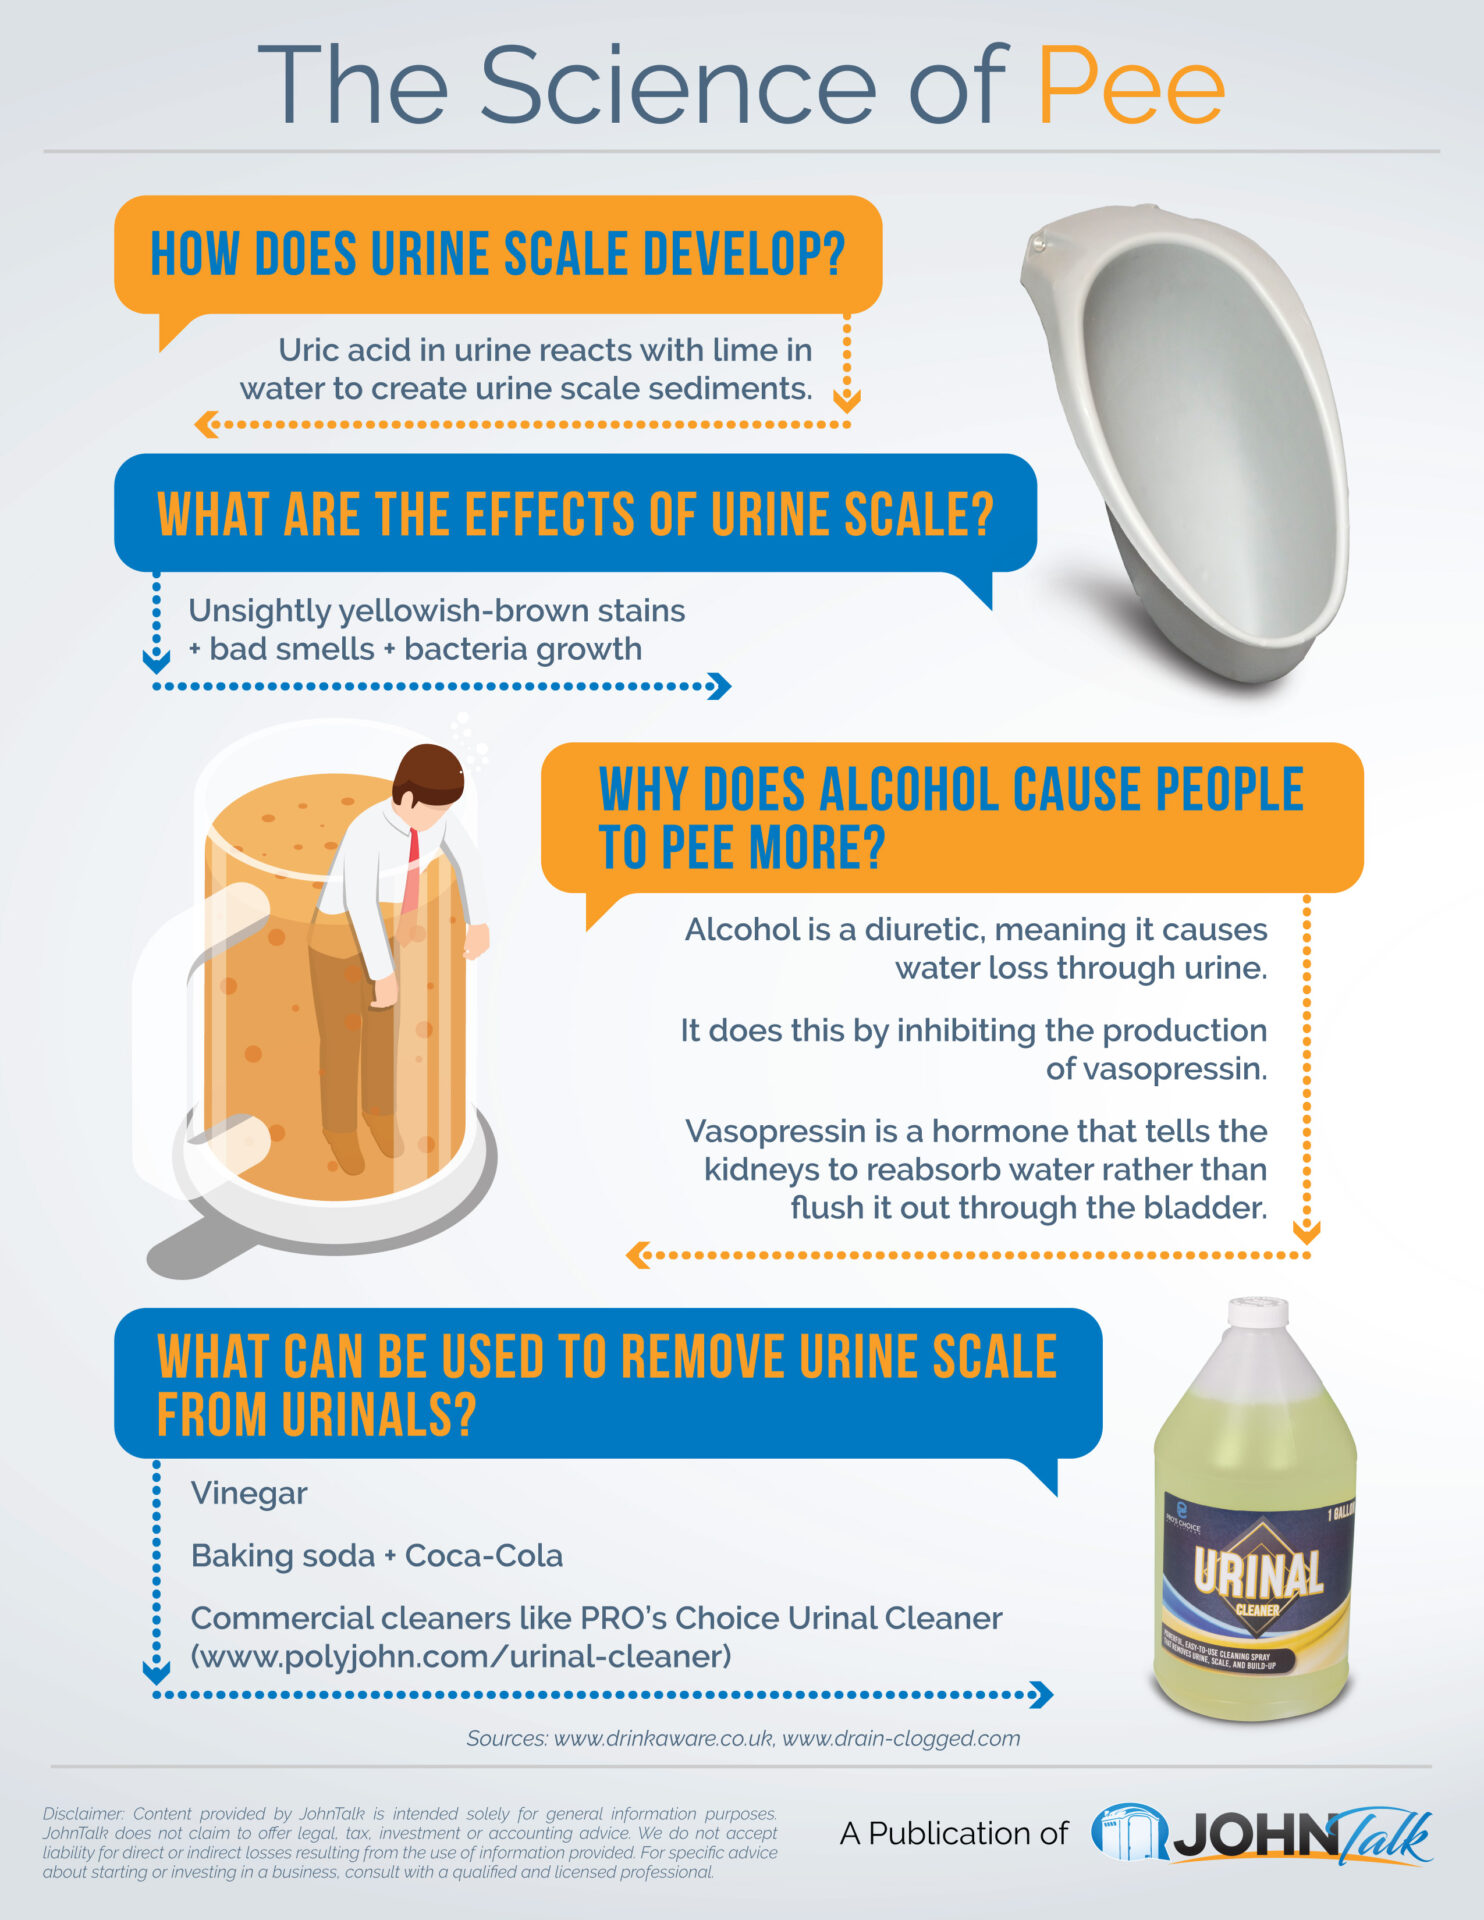 The Science of Pee